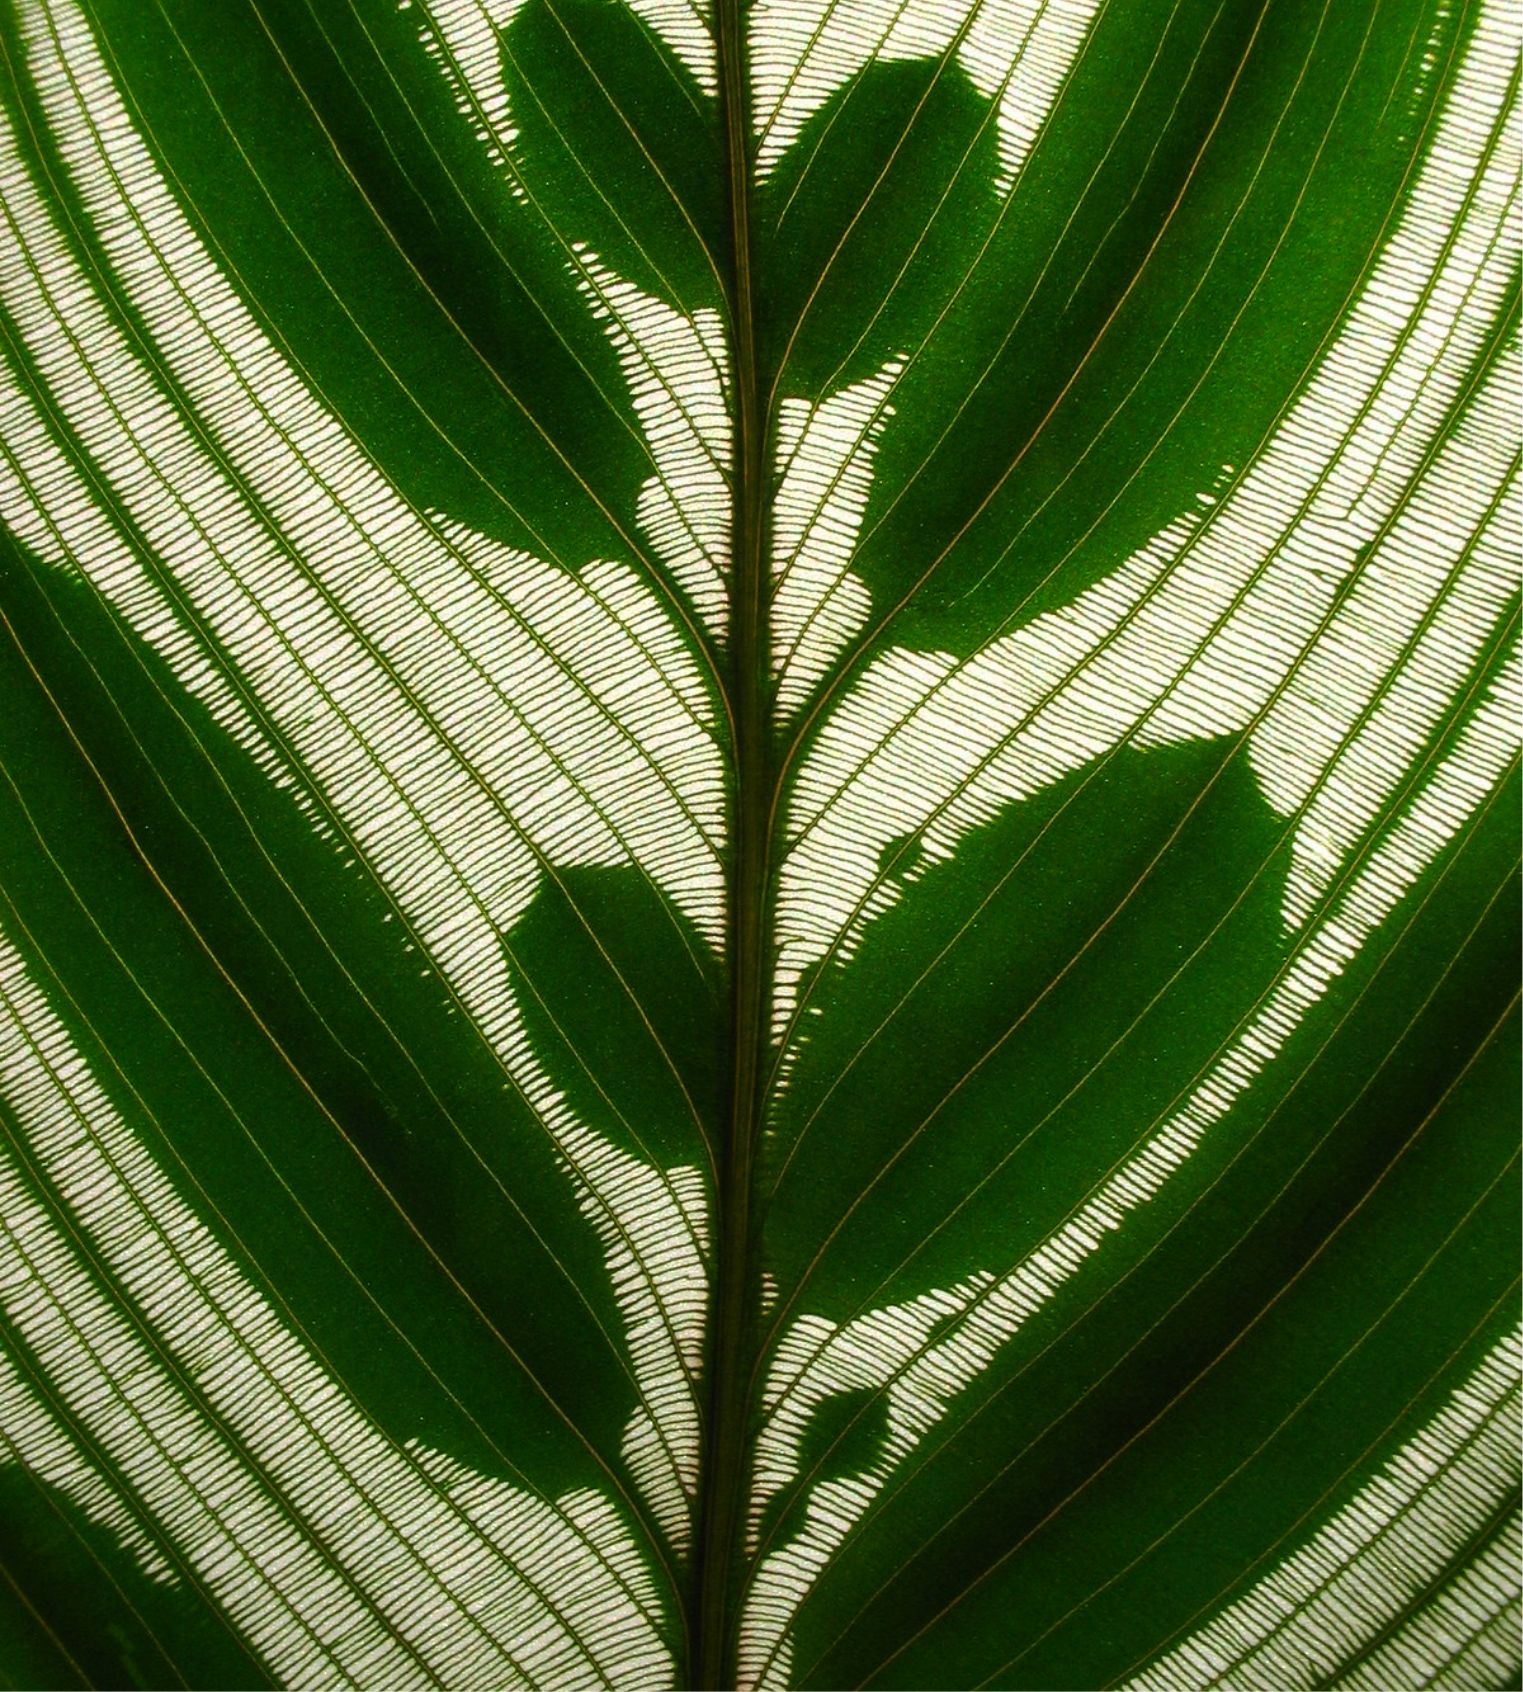 Macro close up of a peacock plant, details of the veins and leaf structure